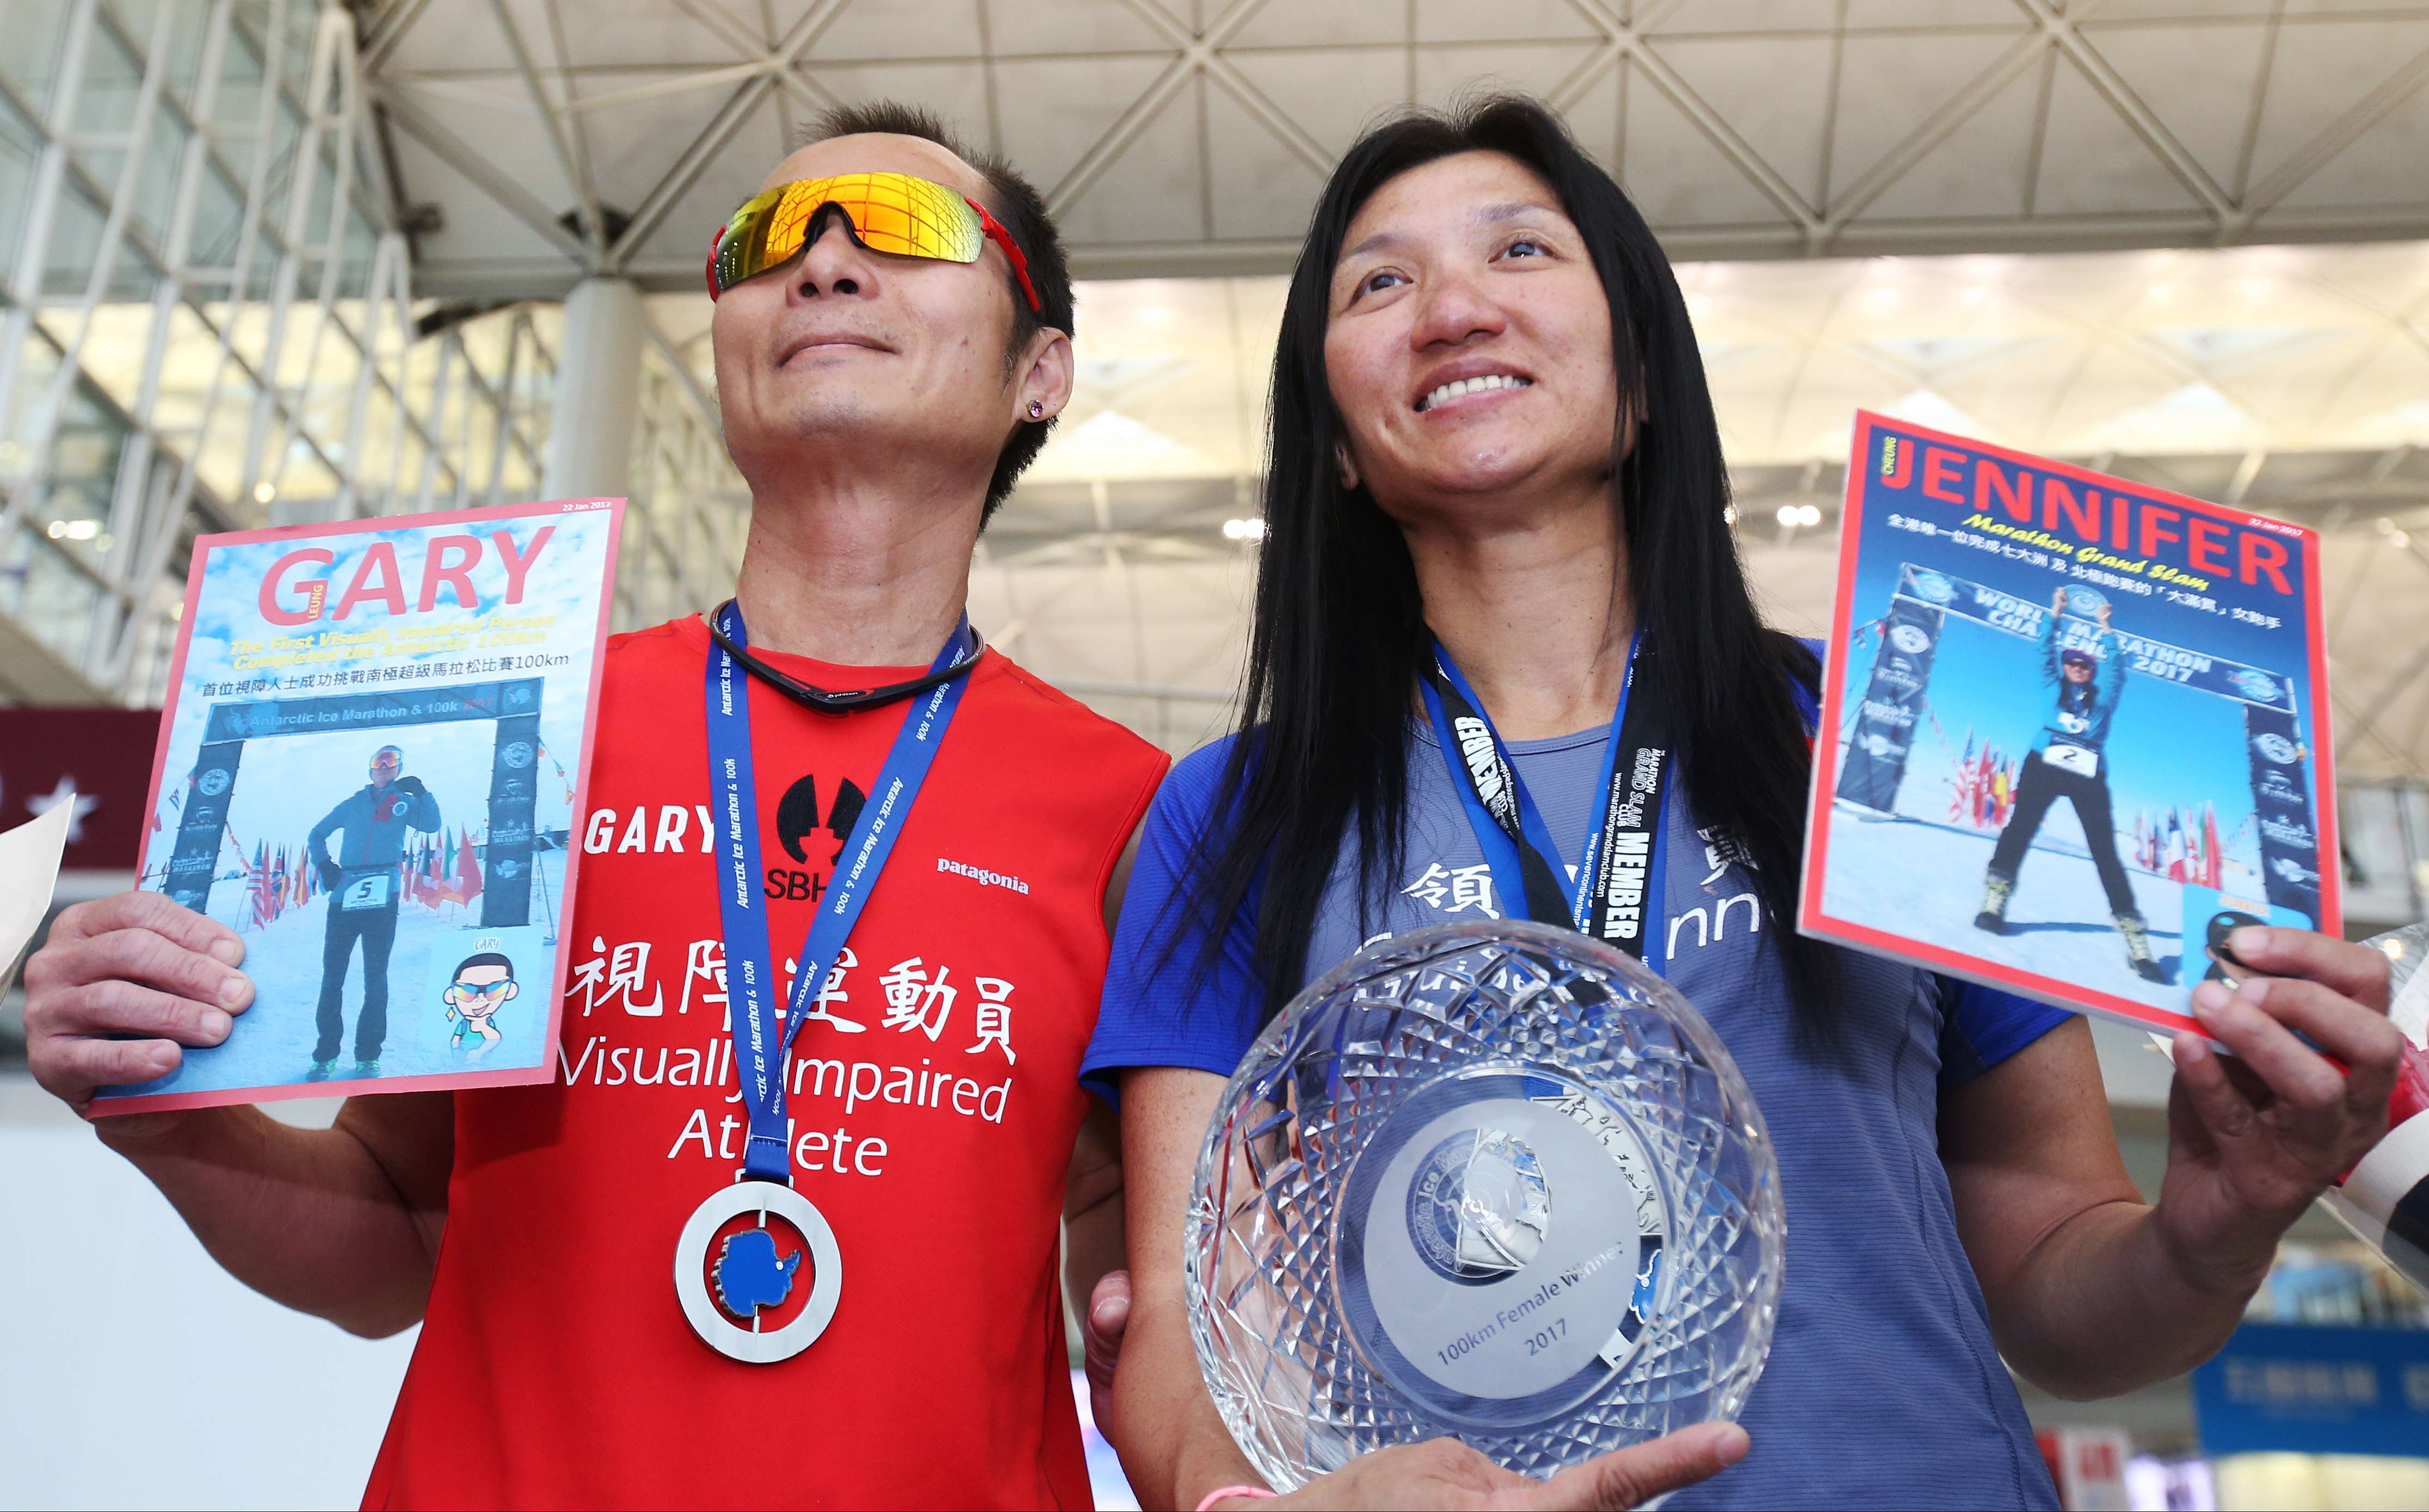 Visually impaired athlete Gary Leung Siu-wai and running partner Jennifer Cheung Sze-ying at Hong Kong international airport after Leung became the first visually impaired athlete to complete a special 100km race in the South Pole, on January 30. The pair took part in the super race, a part of the World Marathon Challenge 2017, to raise funds for Samaritan Befrienders Hong Kong. Photo: David Wong